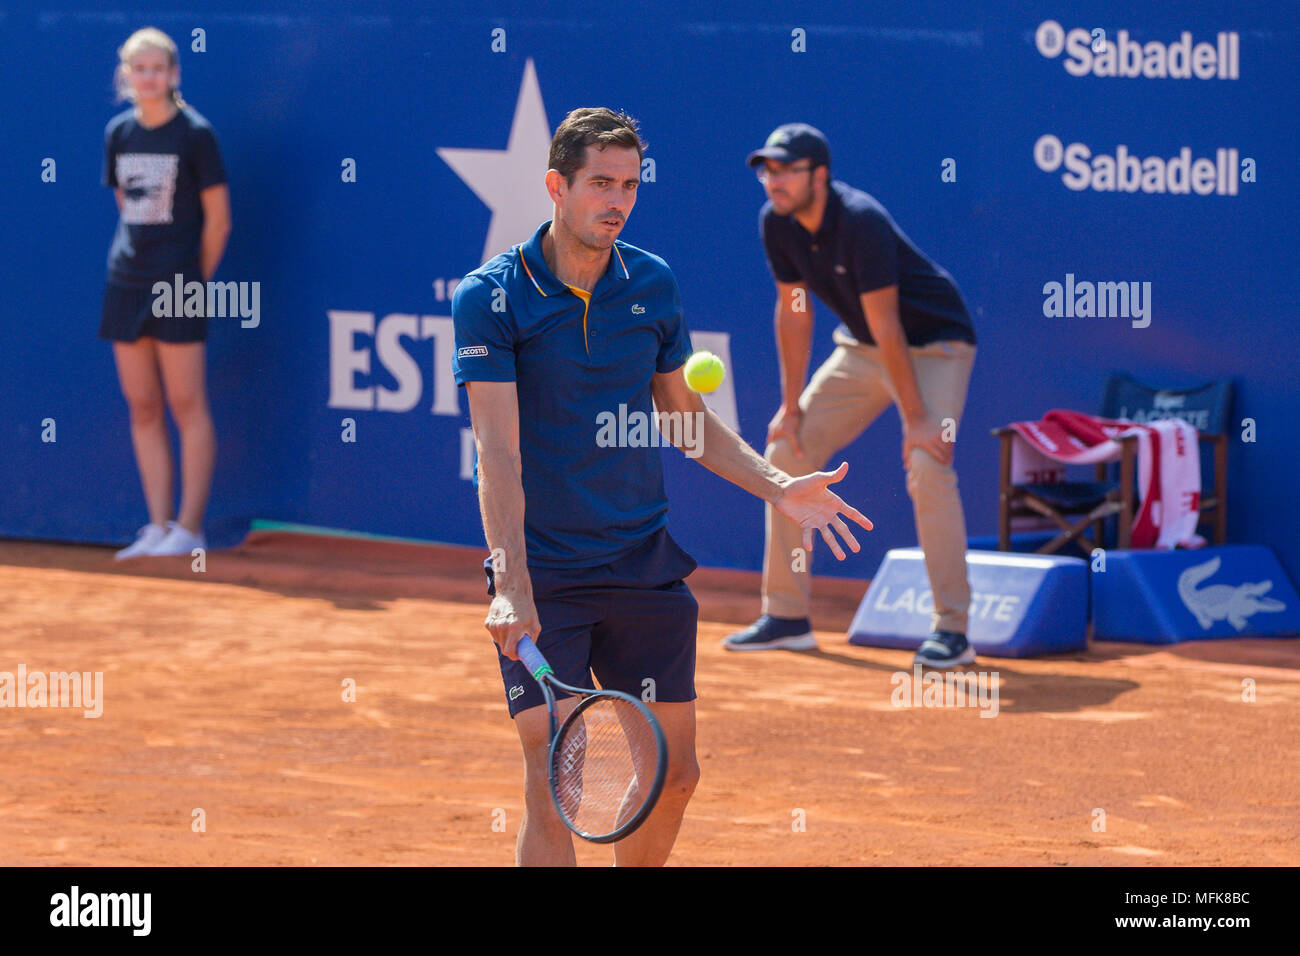 Guillermo Garcia-Lopez during the match against Rafa Nadal at the Barcelona Open Banc Sabadell 2018, on 26th April 2018 in Barcelona, Spain. (Mikel TriguerosUrbanandsportCordonPress) Stock Photo